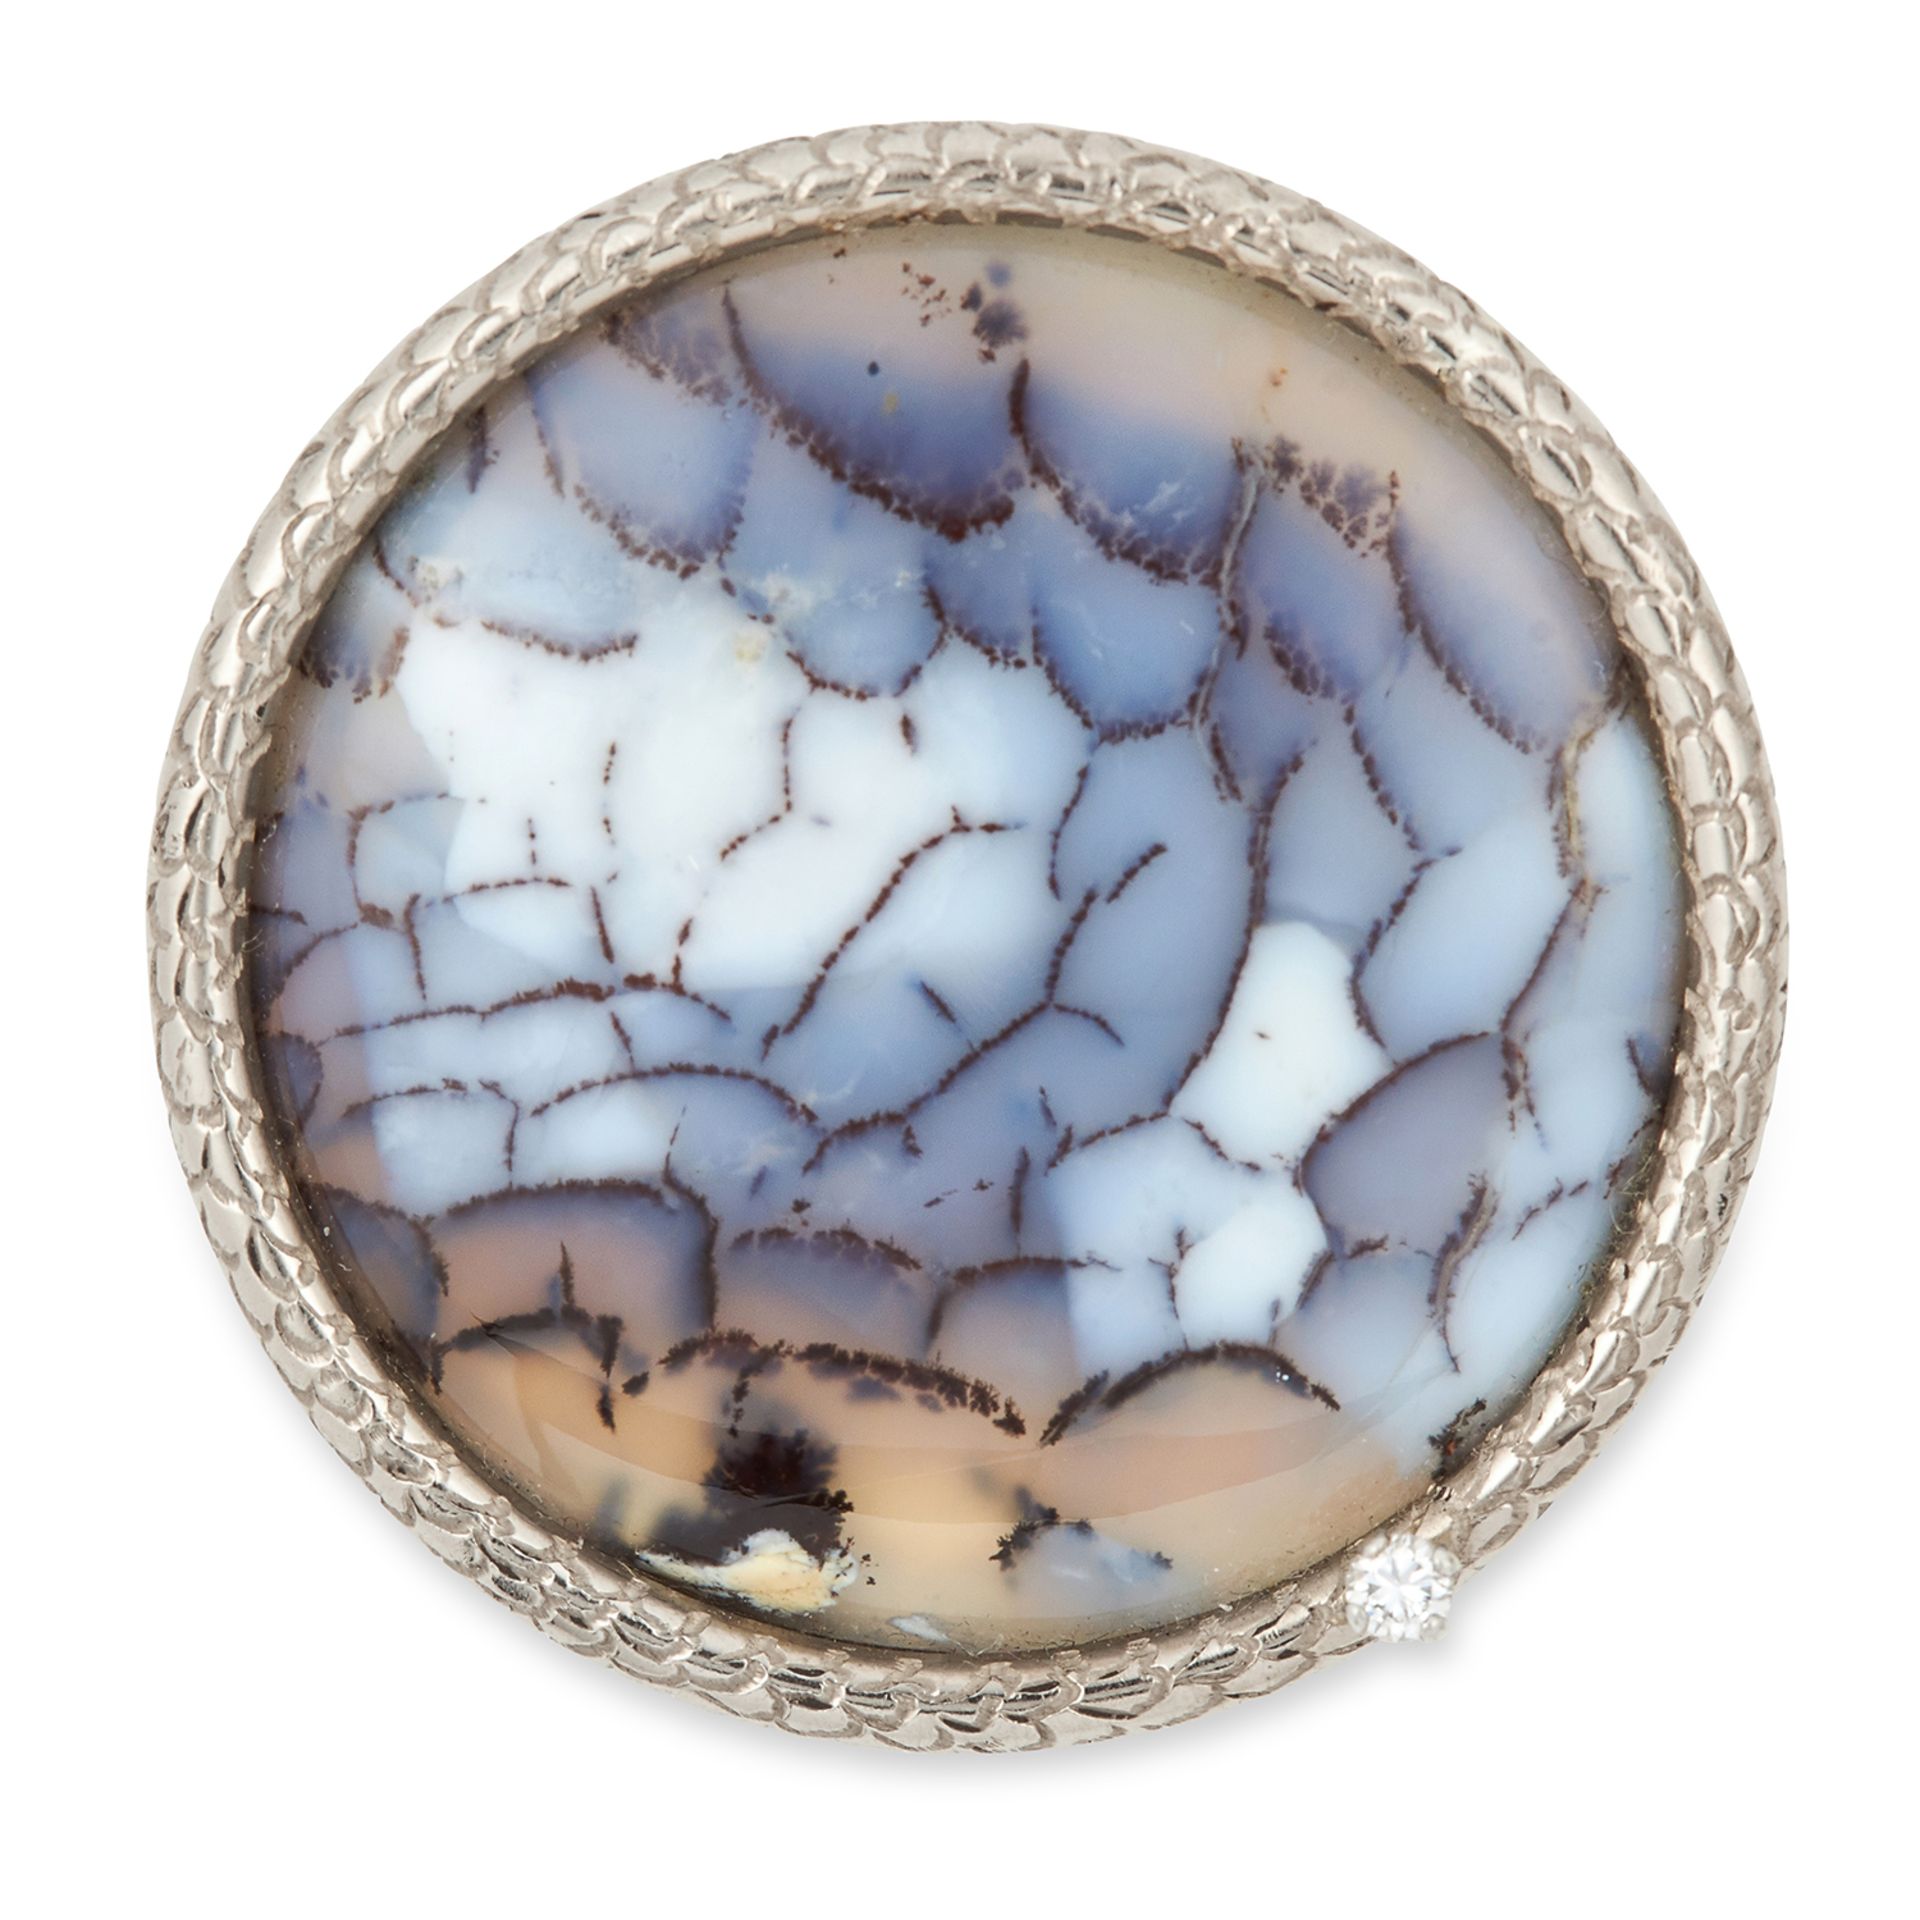 AN AGATE AND DIAMOND BROOCH, ANDREW GRIMA, CIRCA 1970 set with a polished circular agate panel and a